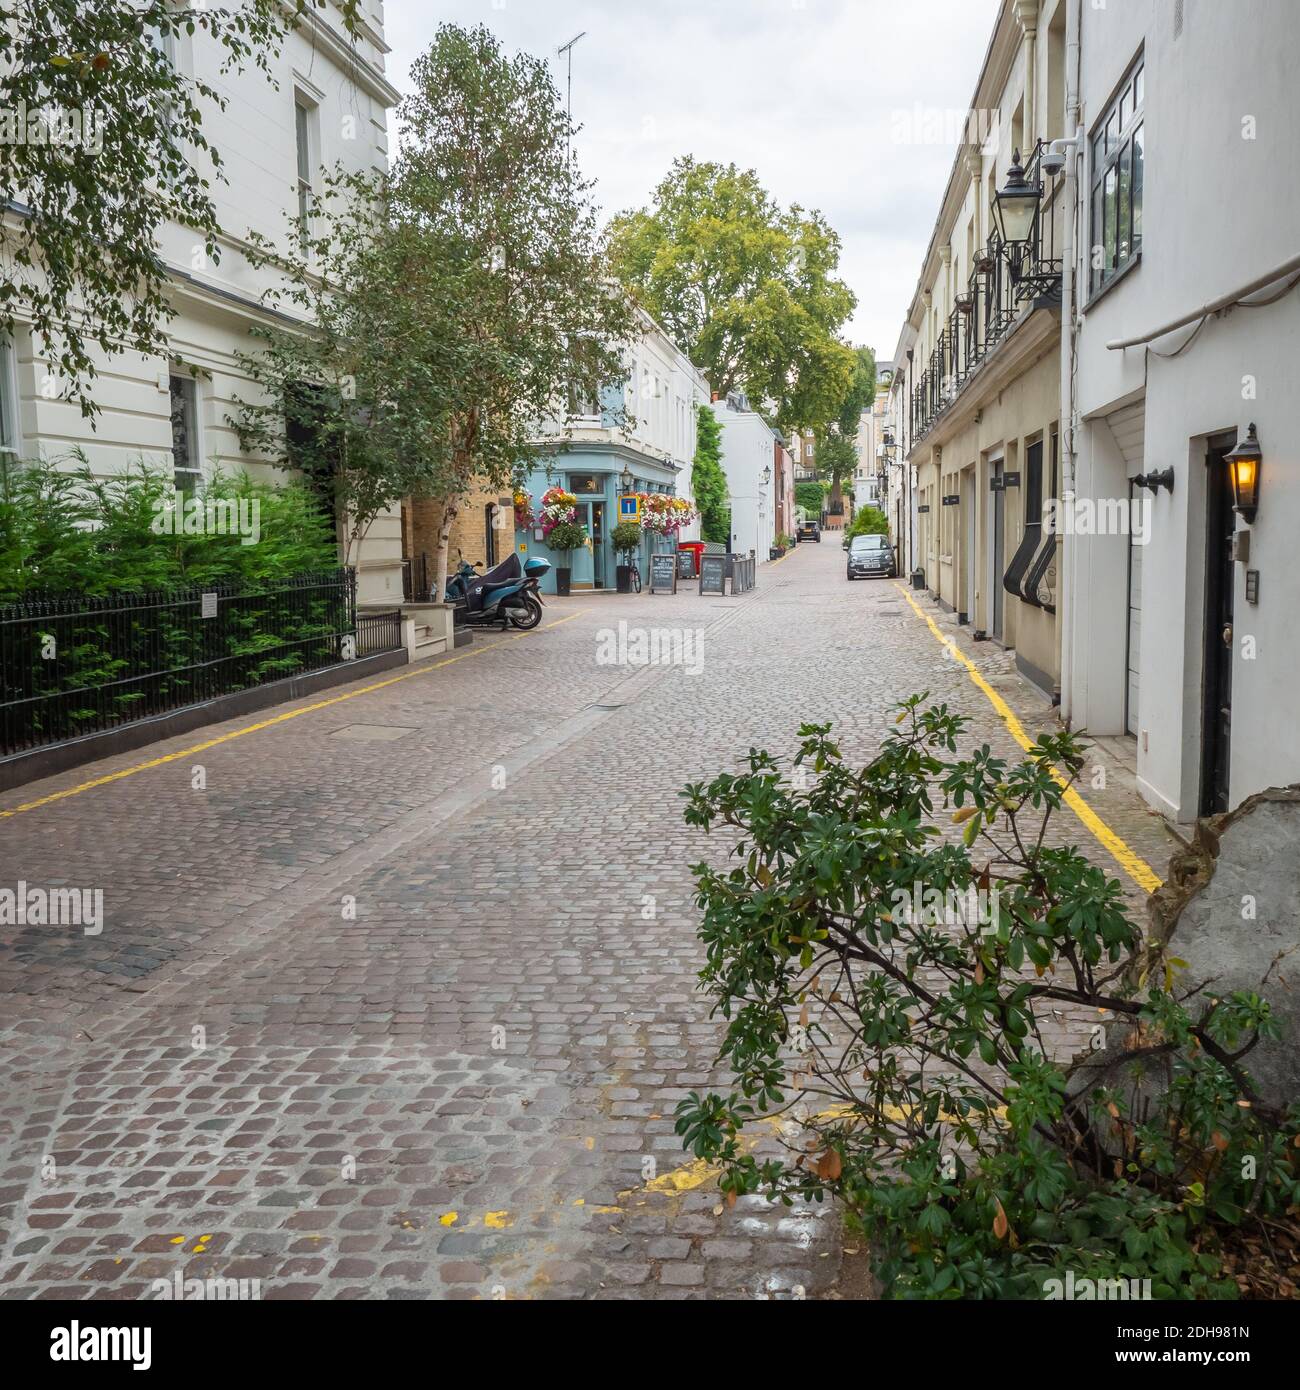 The Queens Arms, London, UK. A typical mews street in South Kensington with cobbled streets and a traditional pub. Stock Photo